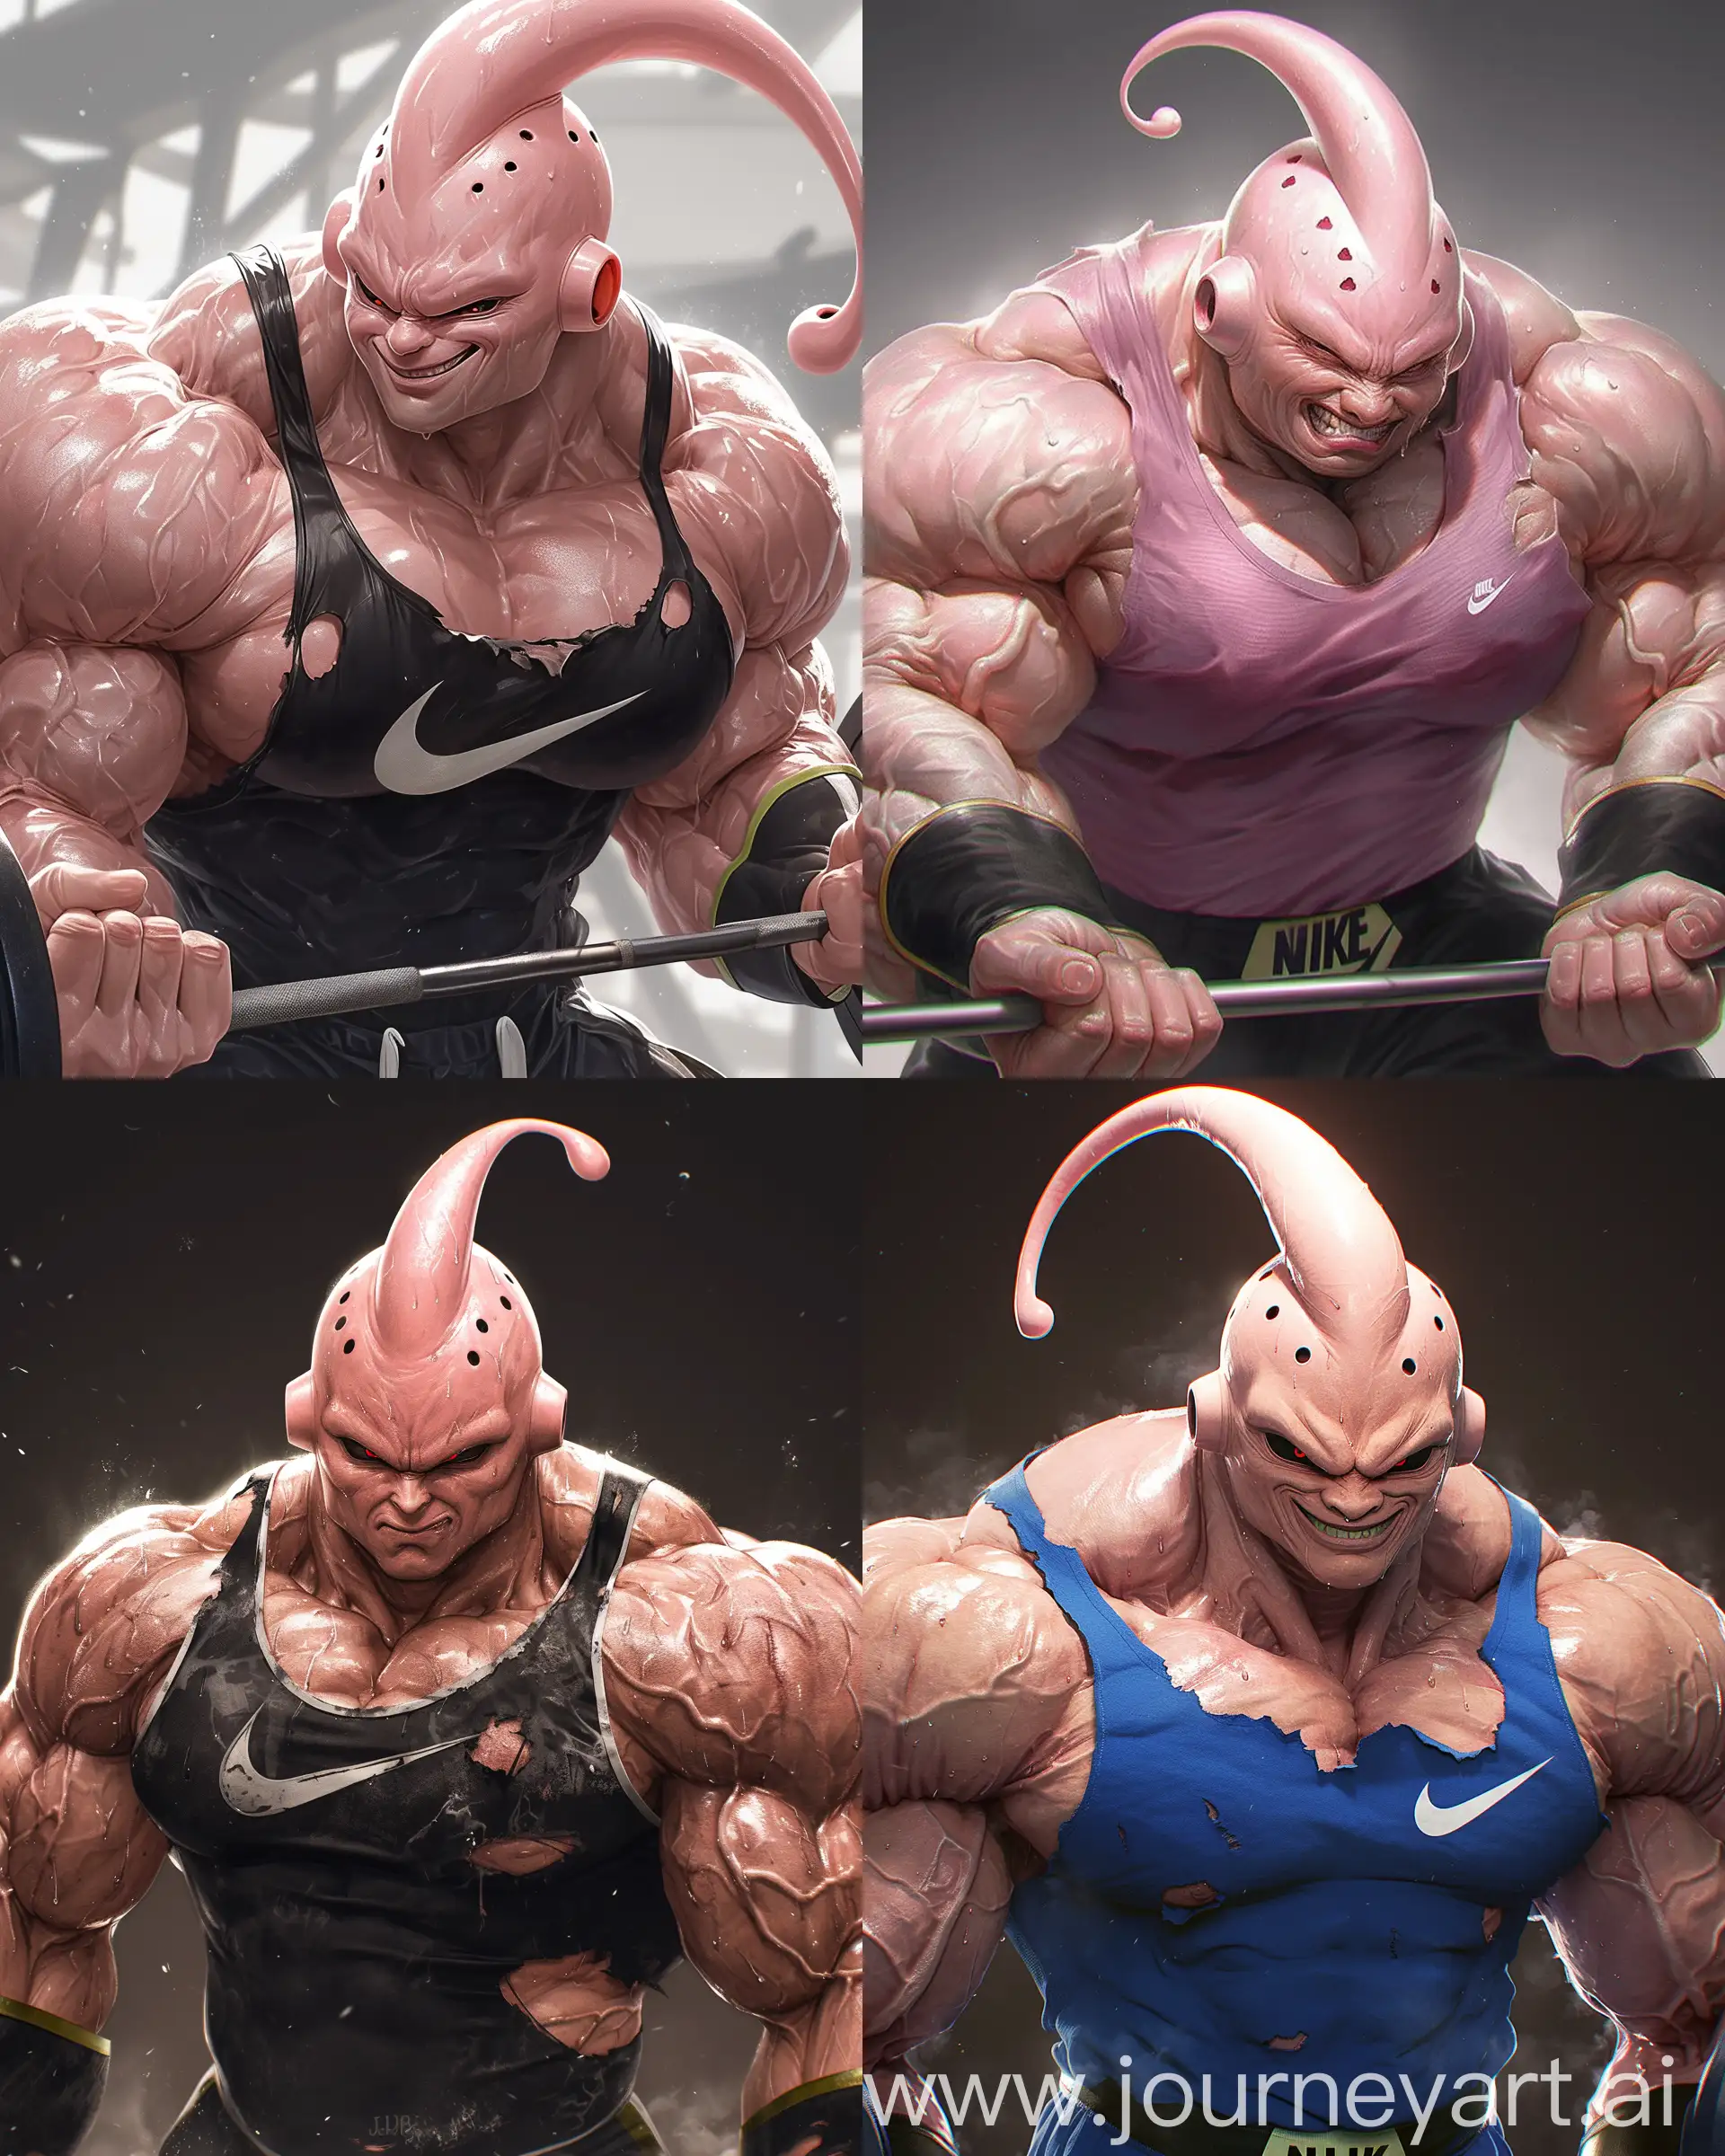 real person god Majin Buu from Dragon Ball World with large pump muscles wearing a Nike outfit doing a deadlift workout with heavy weight, large neck and wide shoulder muscles and thick veins, looks so strong and aggressive and focuses on the viewer with a mean attitude, torn clothes, sweating  with shiny skin, he still majin buu from dragon ball world 32k UHD HDR super crispy detail hyperrealistic, hyperrealism, --ar 4:5 --niji 6